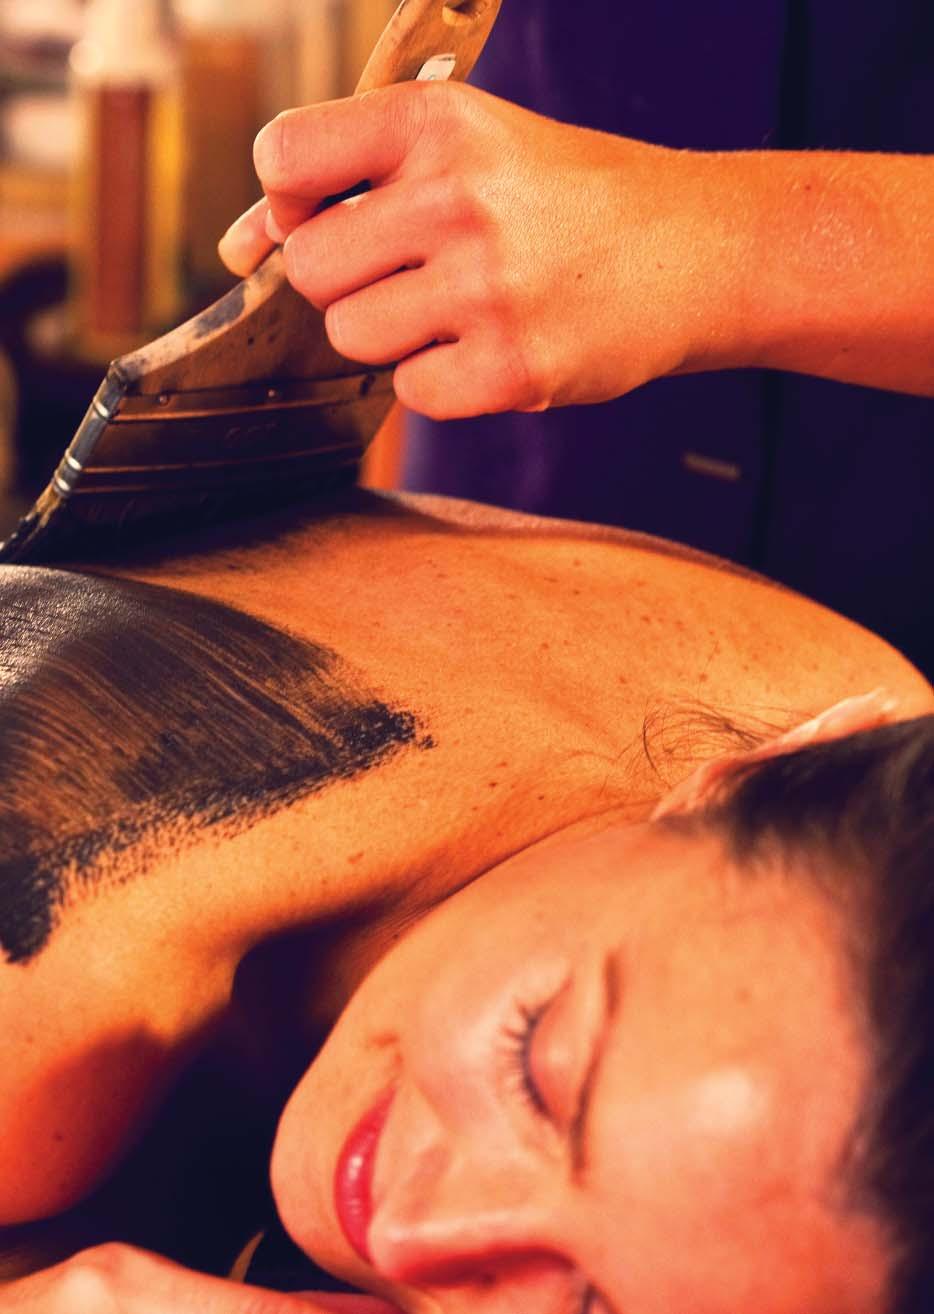 Spa Body Treatments Luxurious mineral body treatments utilise the natural powers of mud, salt and seaweed to tone and firm the body, ease muscle tension and deeply relax the body and mind.